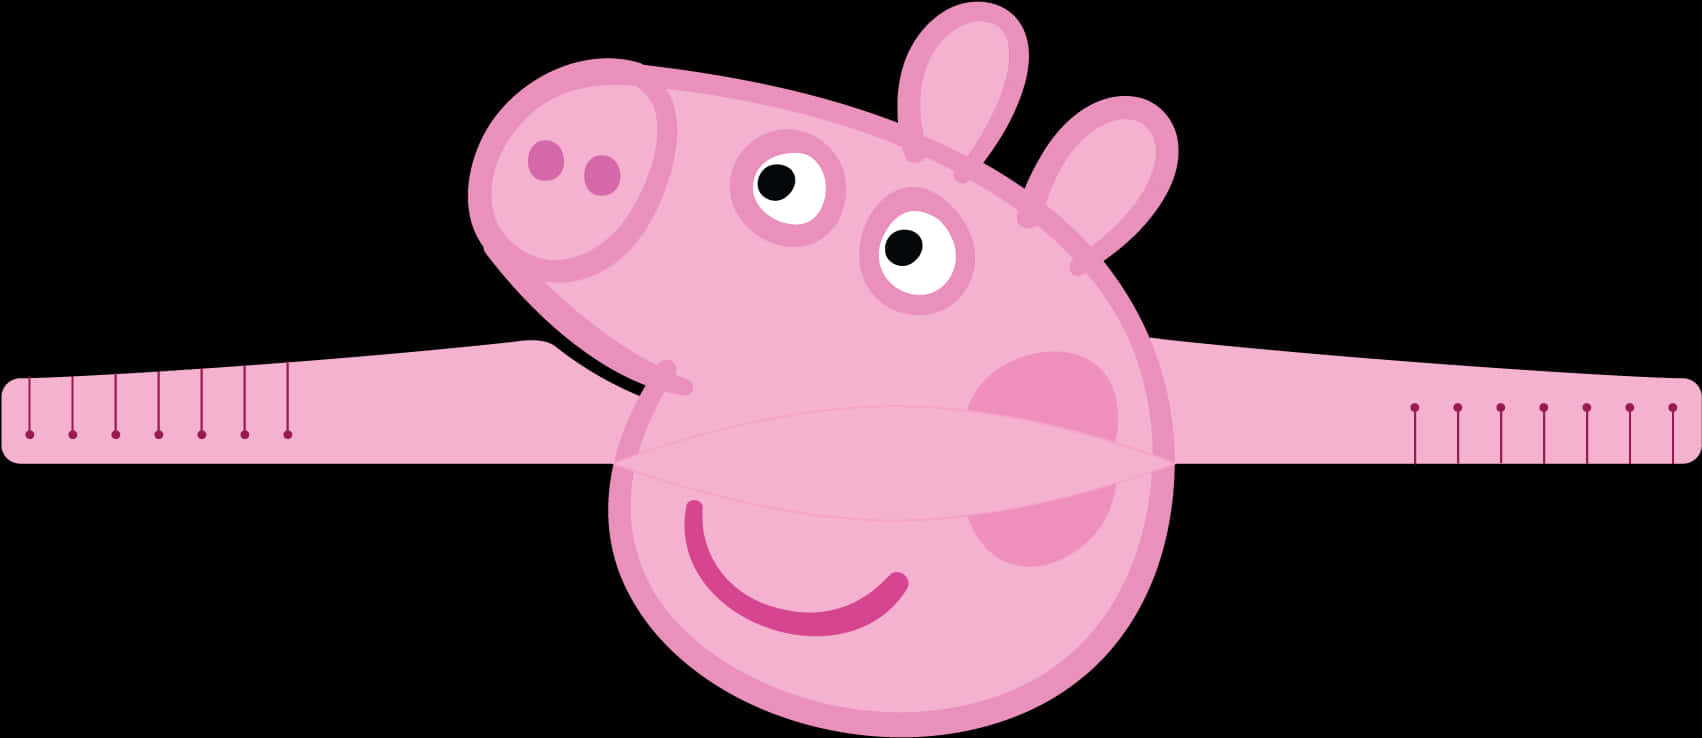 A Cartoon Pig With Wings